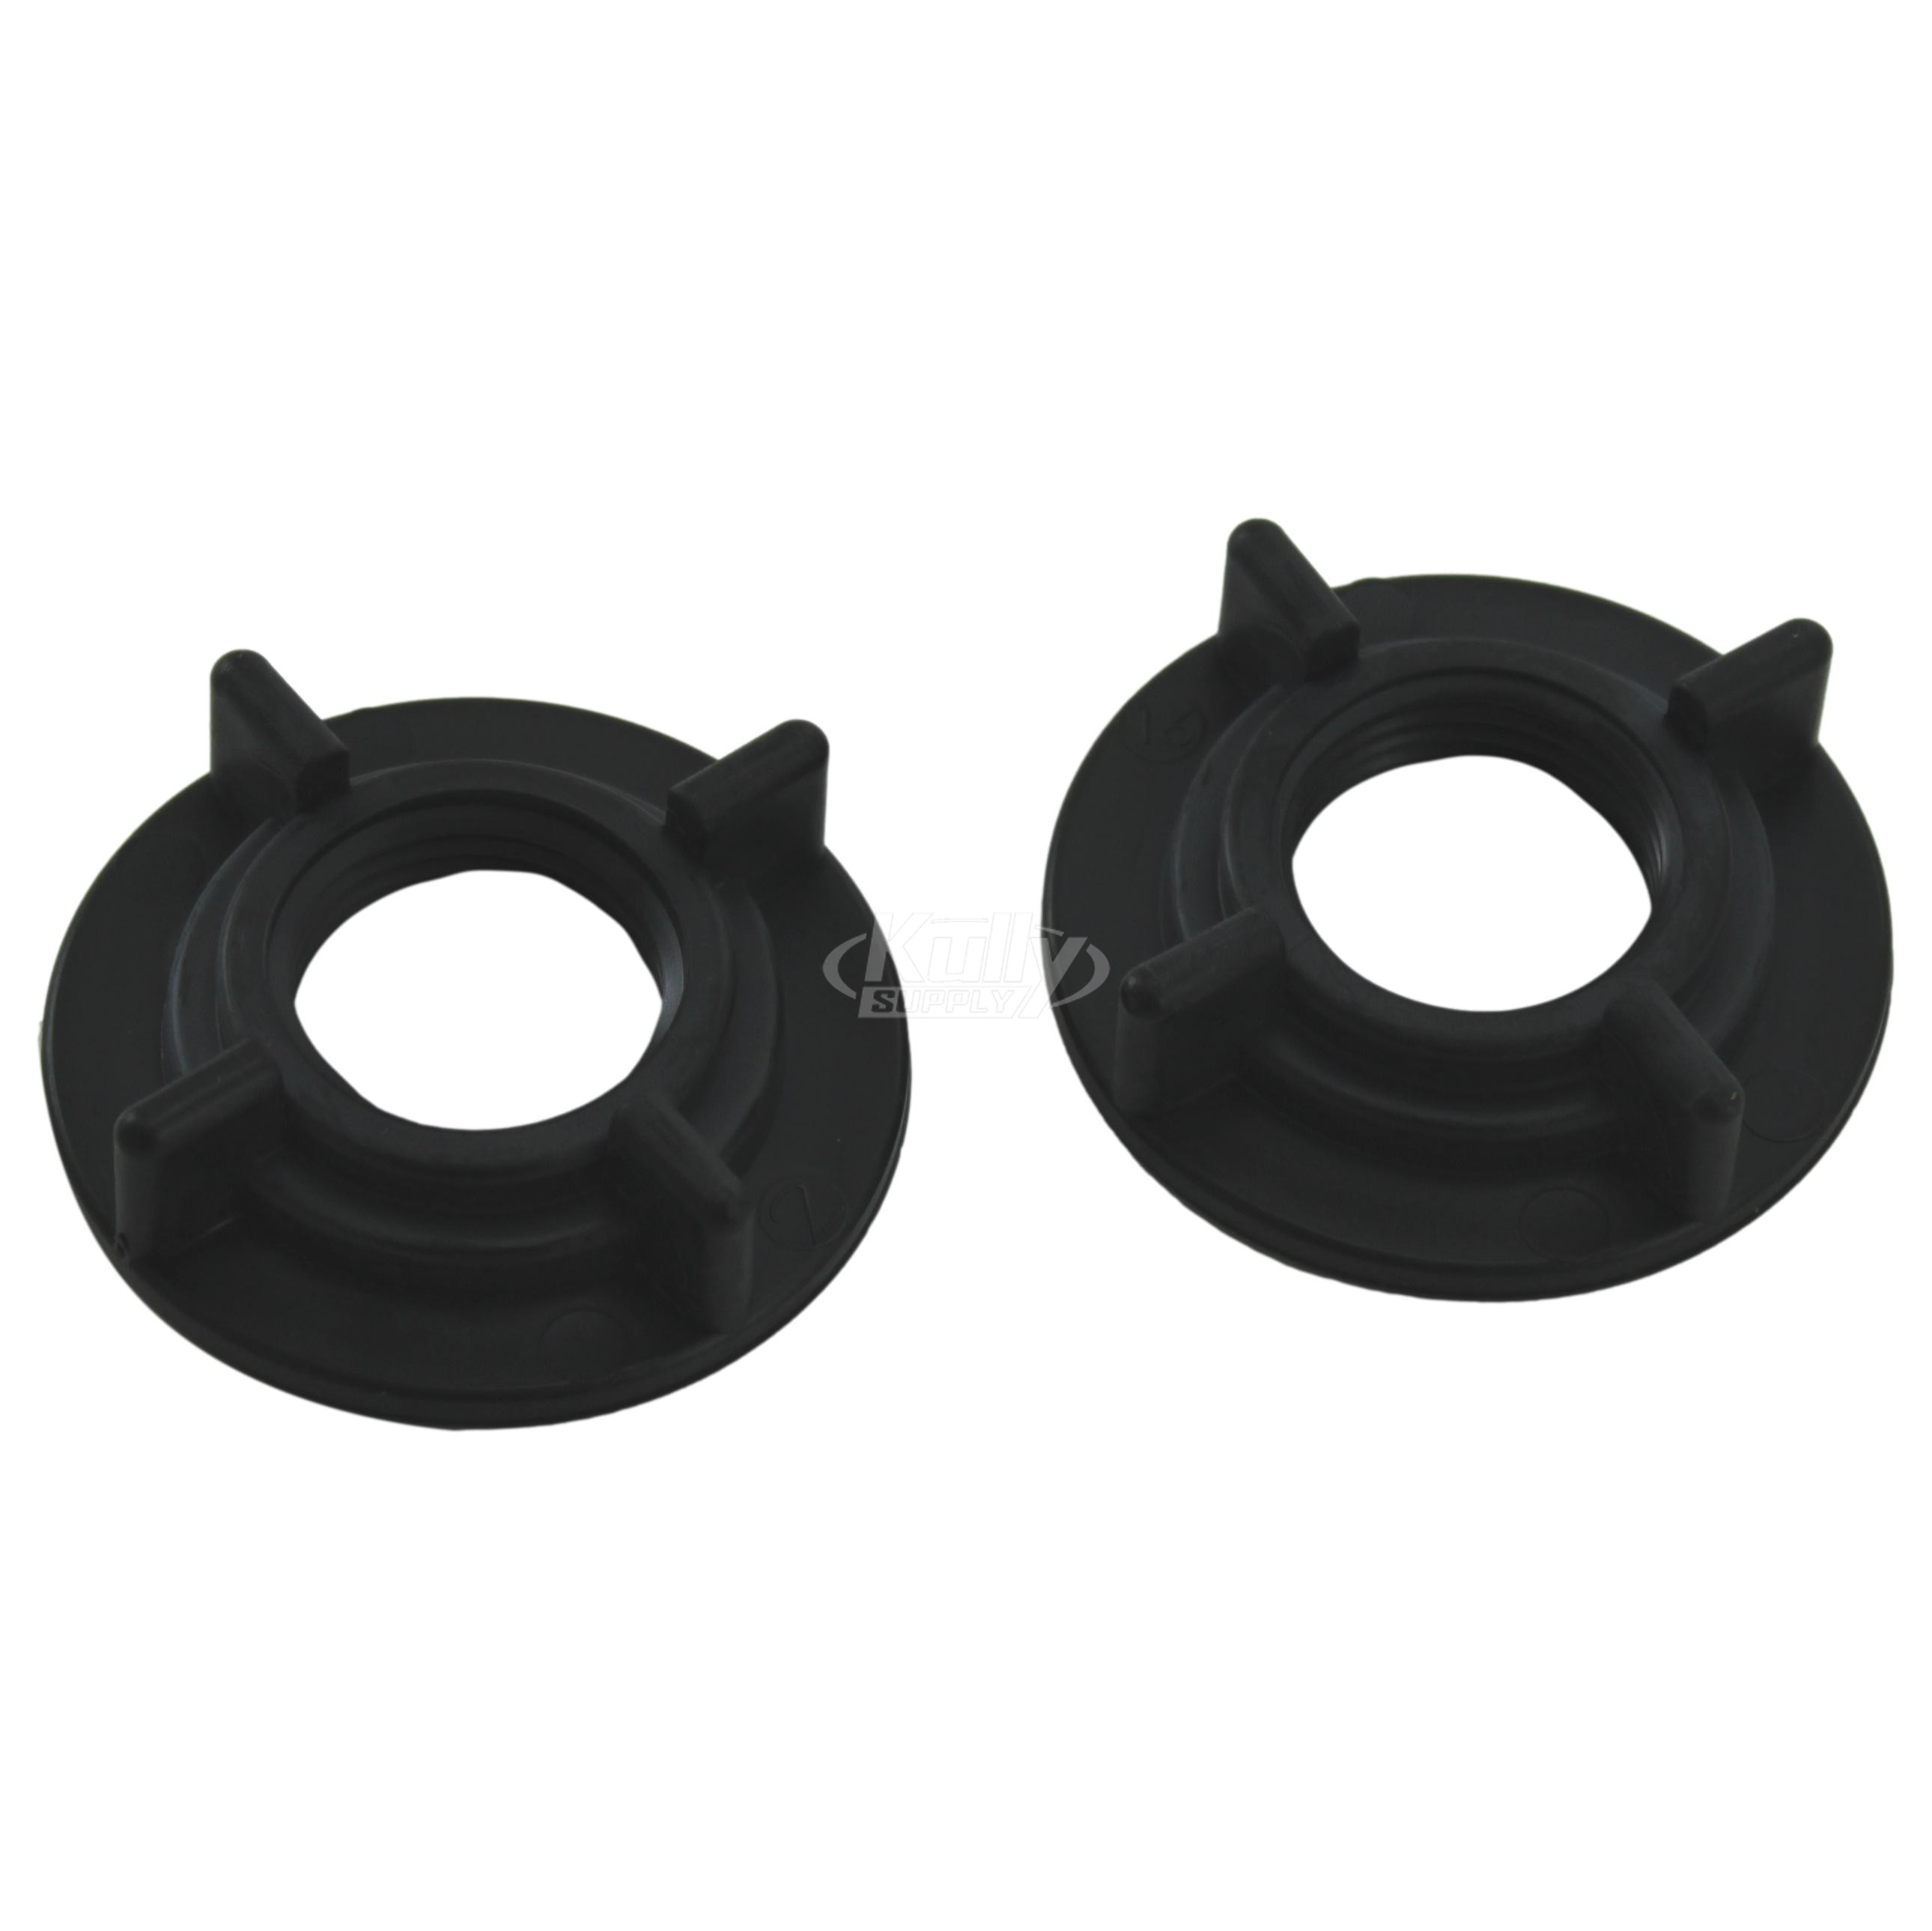 American Standard 065800-0070A Mounting Nut (Set Of 2)